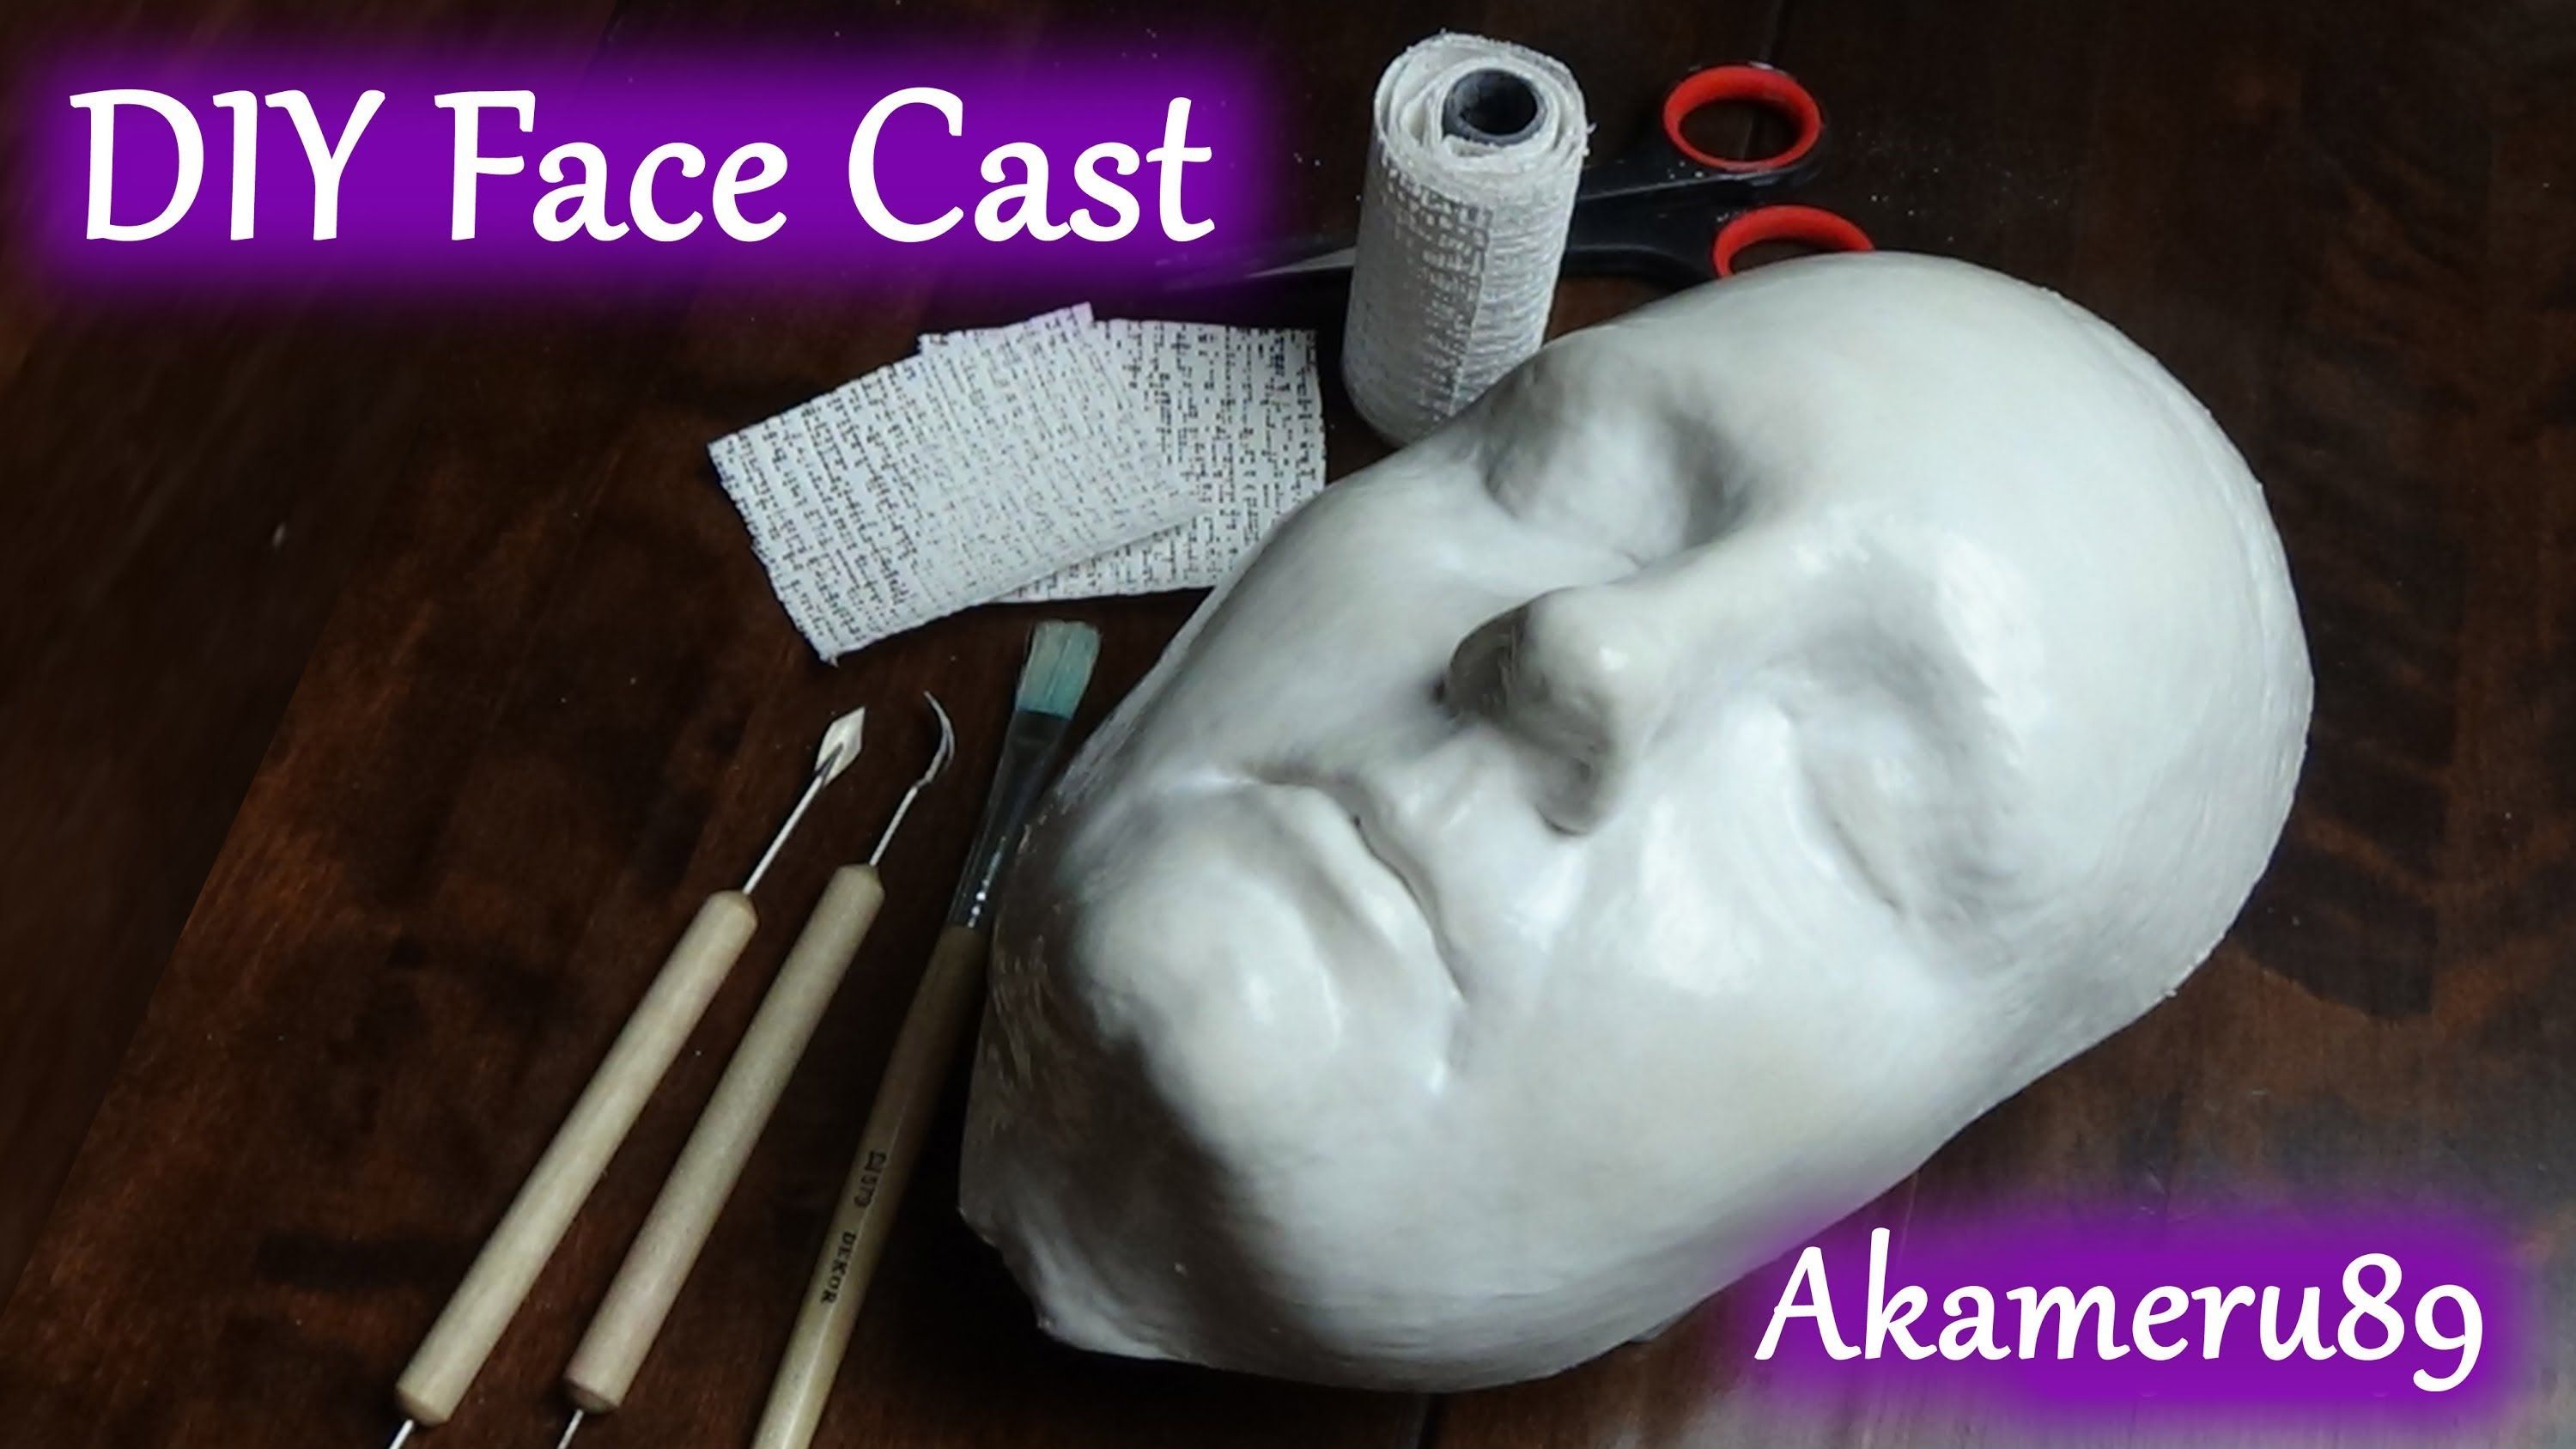 Hi Guys! I wanted a face cast to masks and such on an decided on making my own :) I did it by making a full face mask on my self with plaser gauze (don't do ... -   24 diy face cast
 ideas